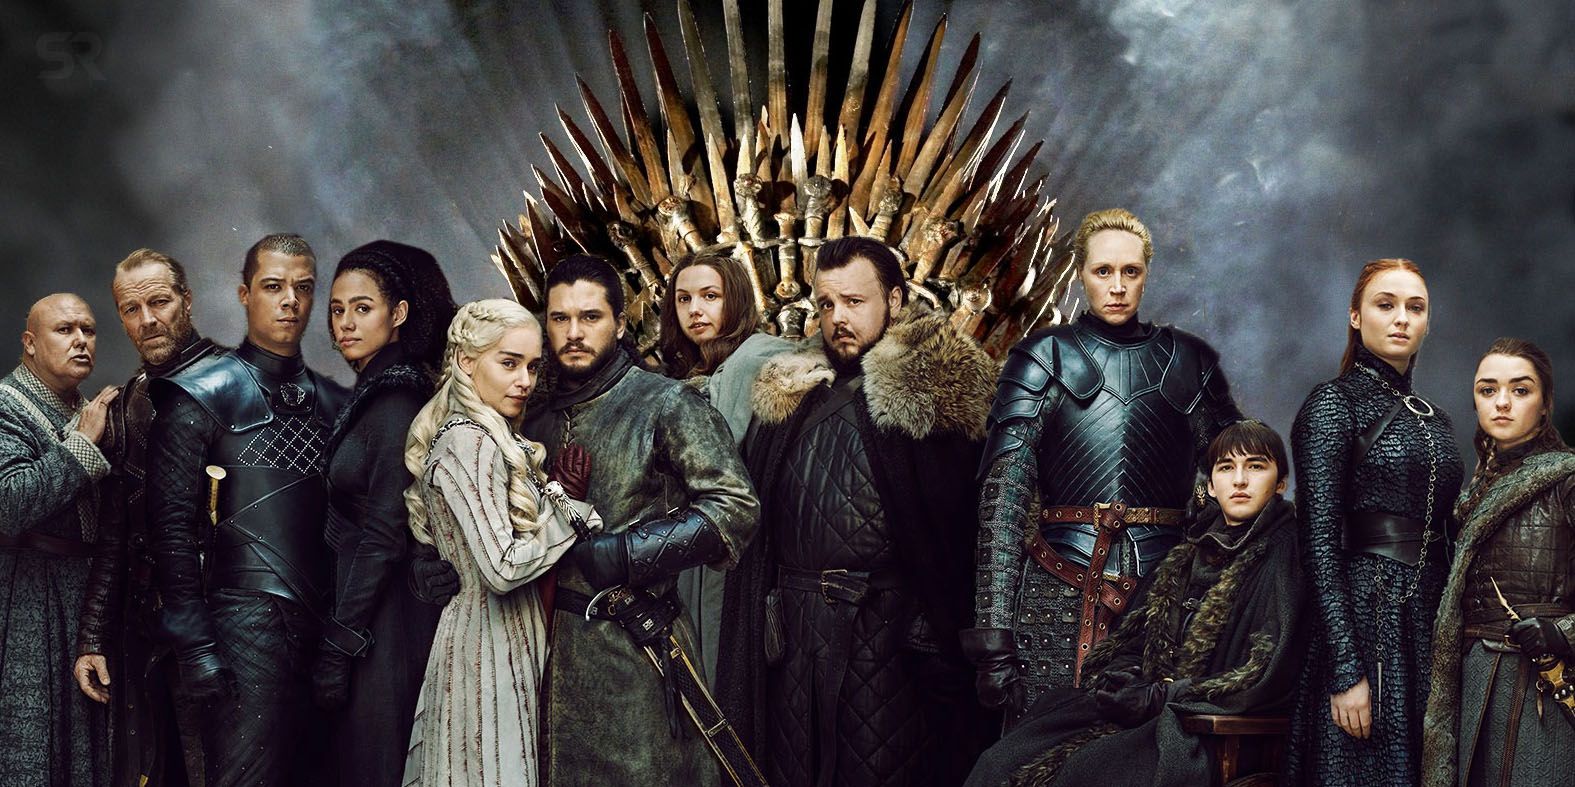 game-of-thrones-the-main-characters-story-arcs-ranked-from-worst-to-best